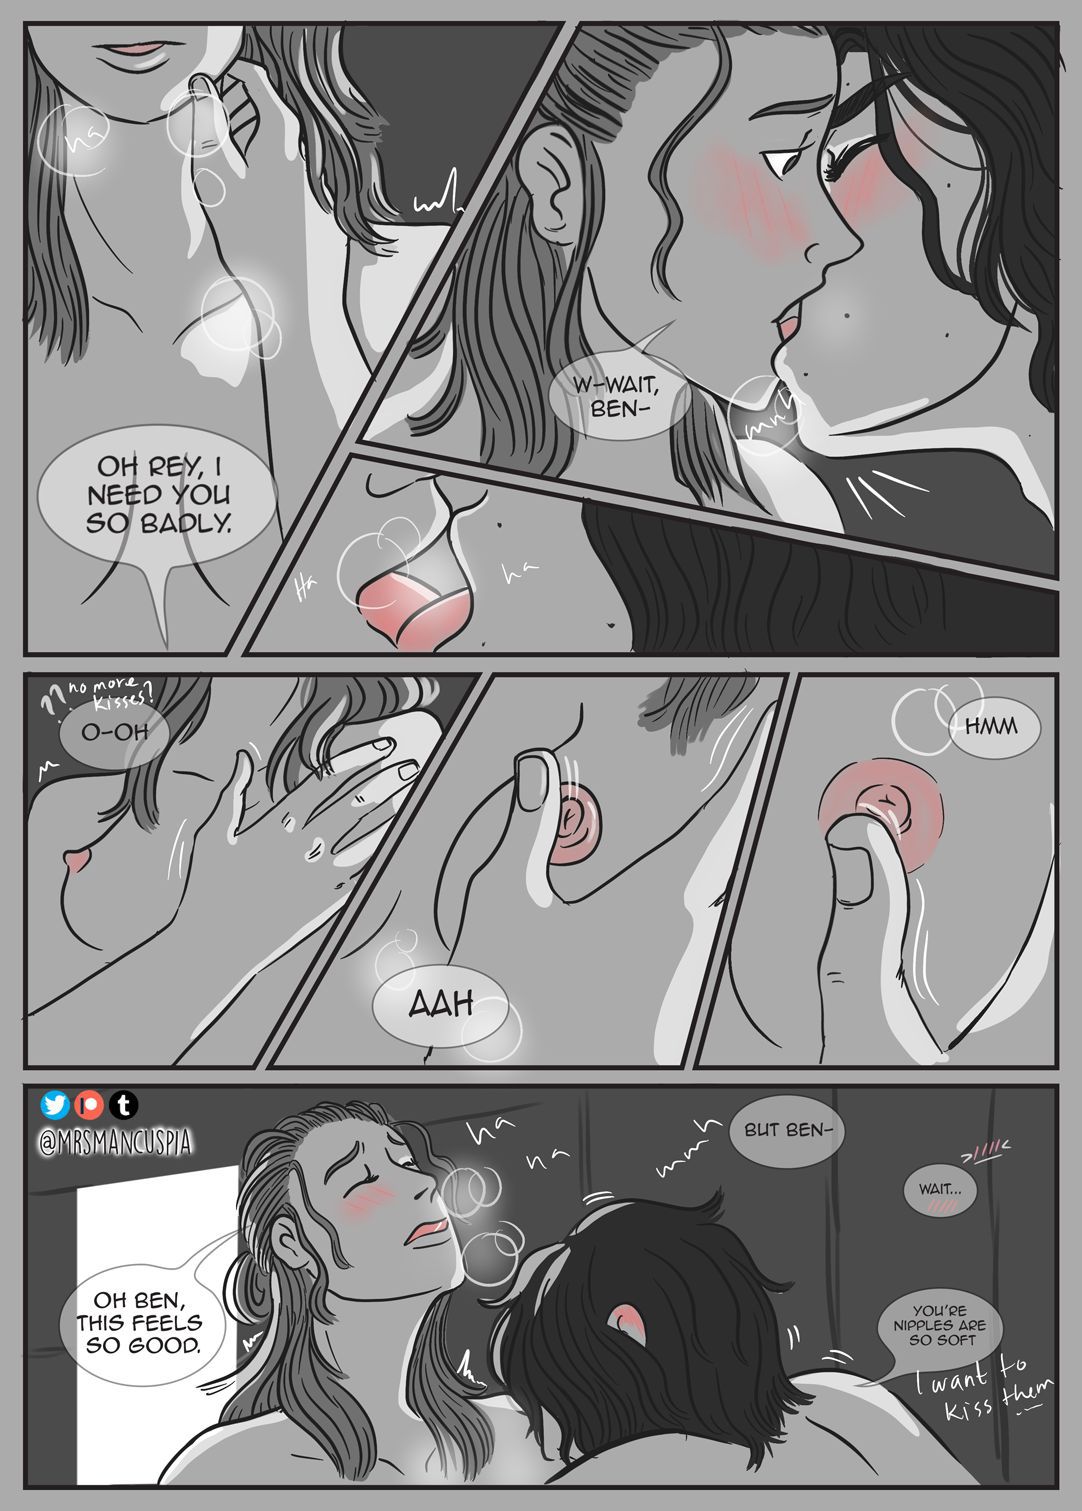 [Mrs Mancuspia] Bedroom Learning (Star Wars) [Ongoing] 50